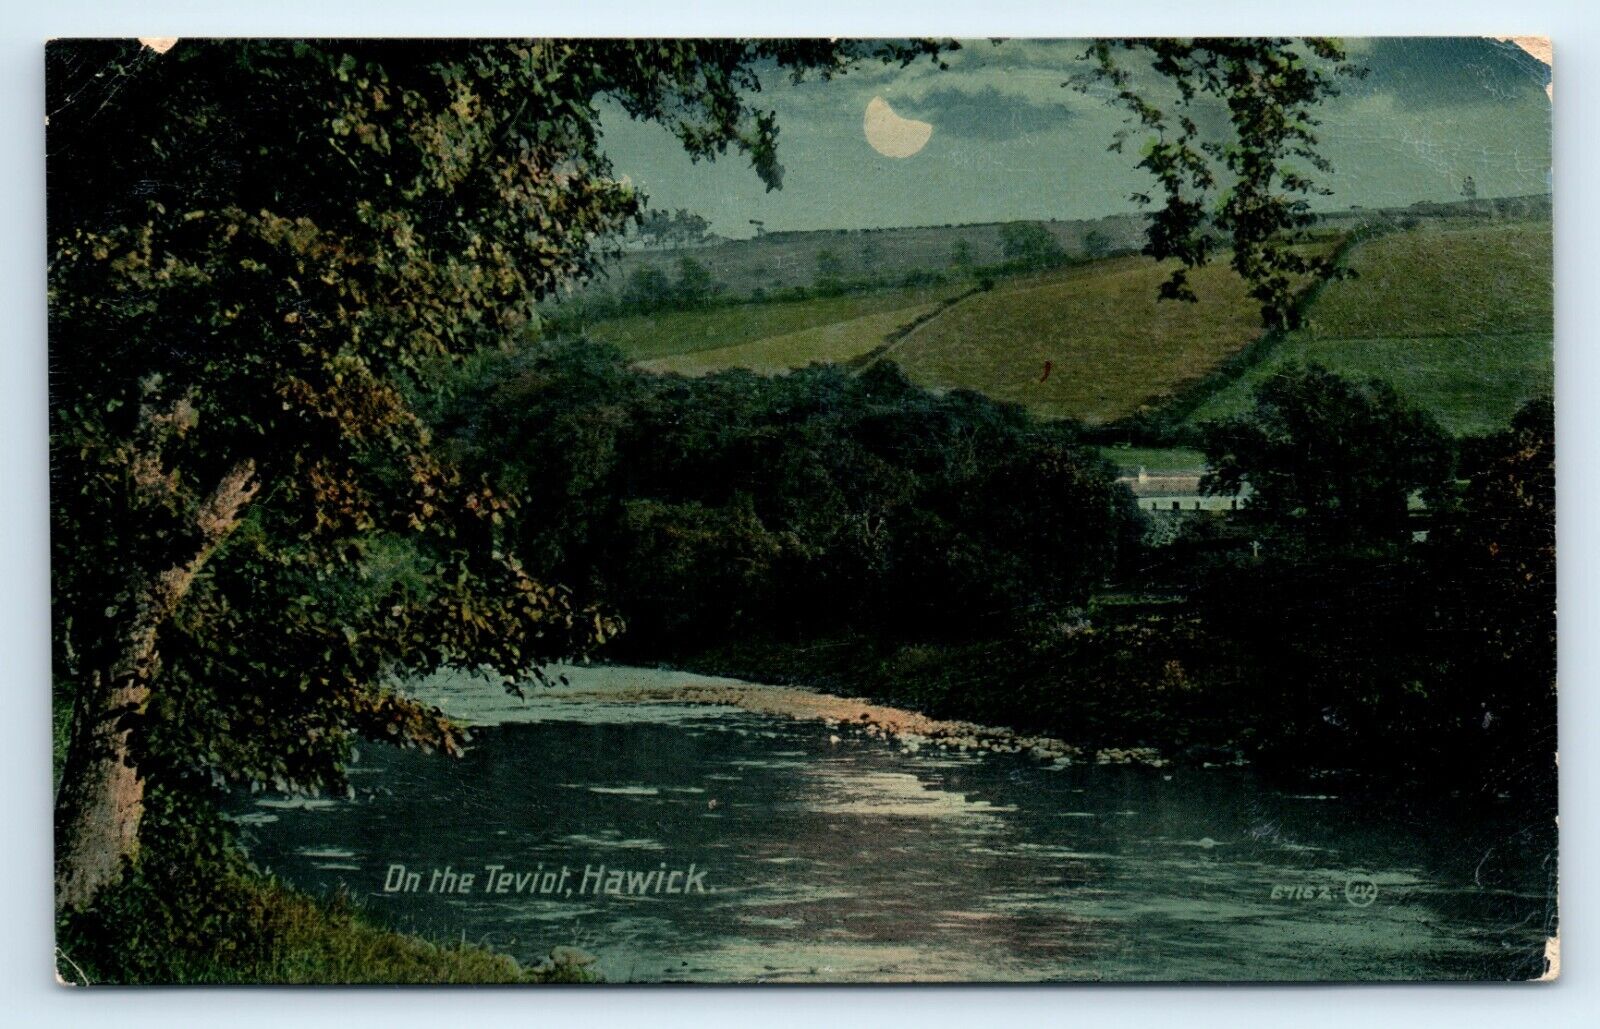 House Clearance - POSTCARD HAWICK MOON MOONLIGHT ON THE TEVIOT - 1919 GLOSSY